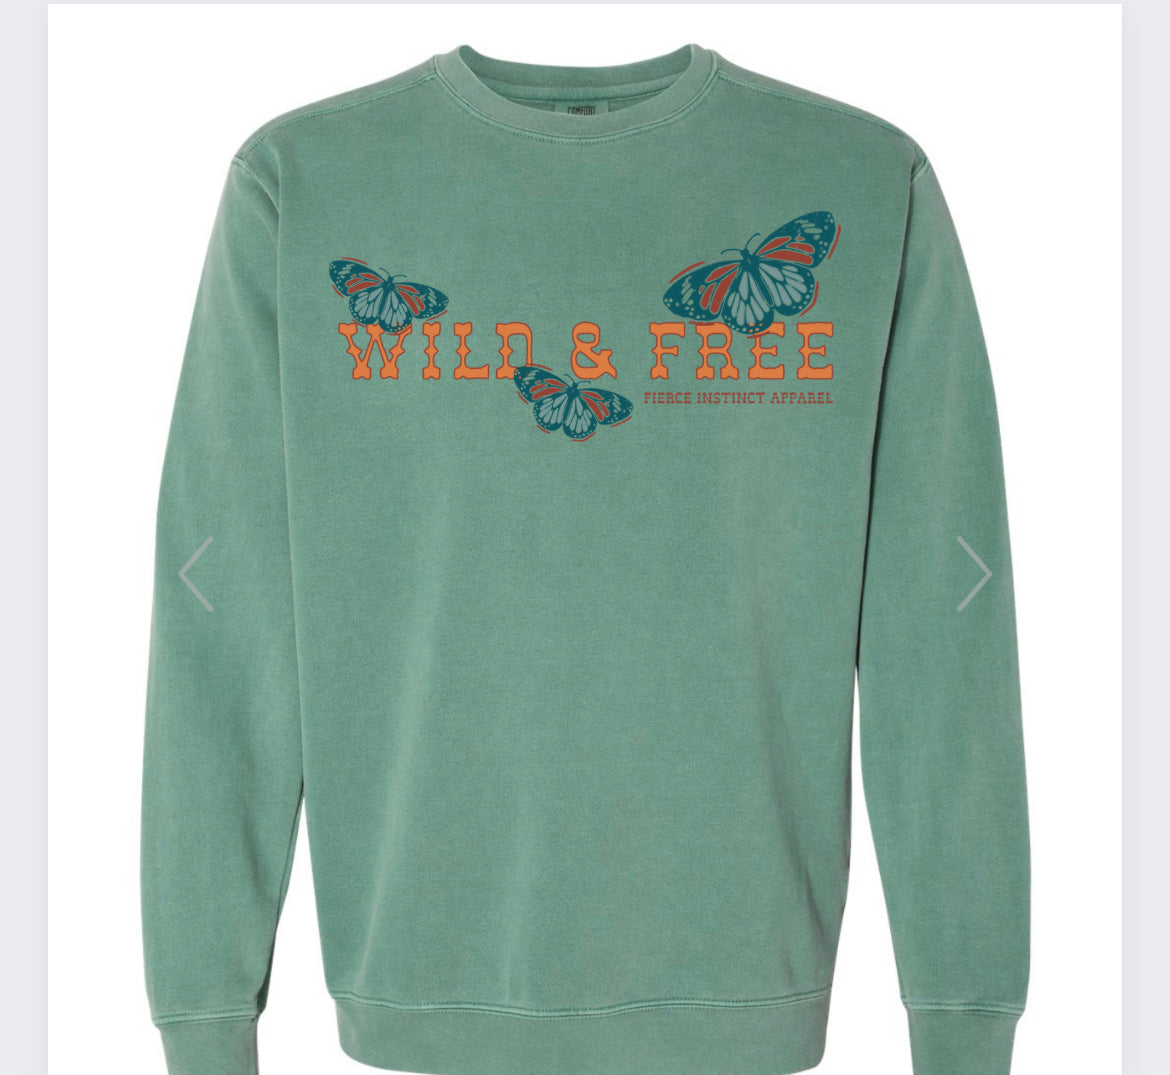 Wild & Free Butterfly Cozy Crew PREORDER